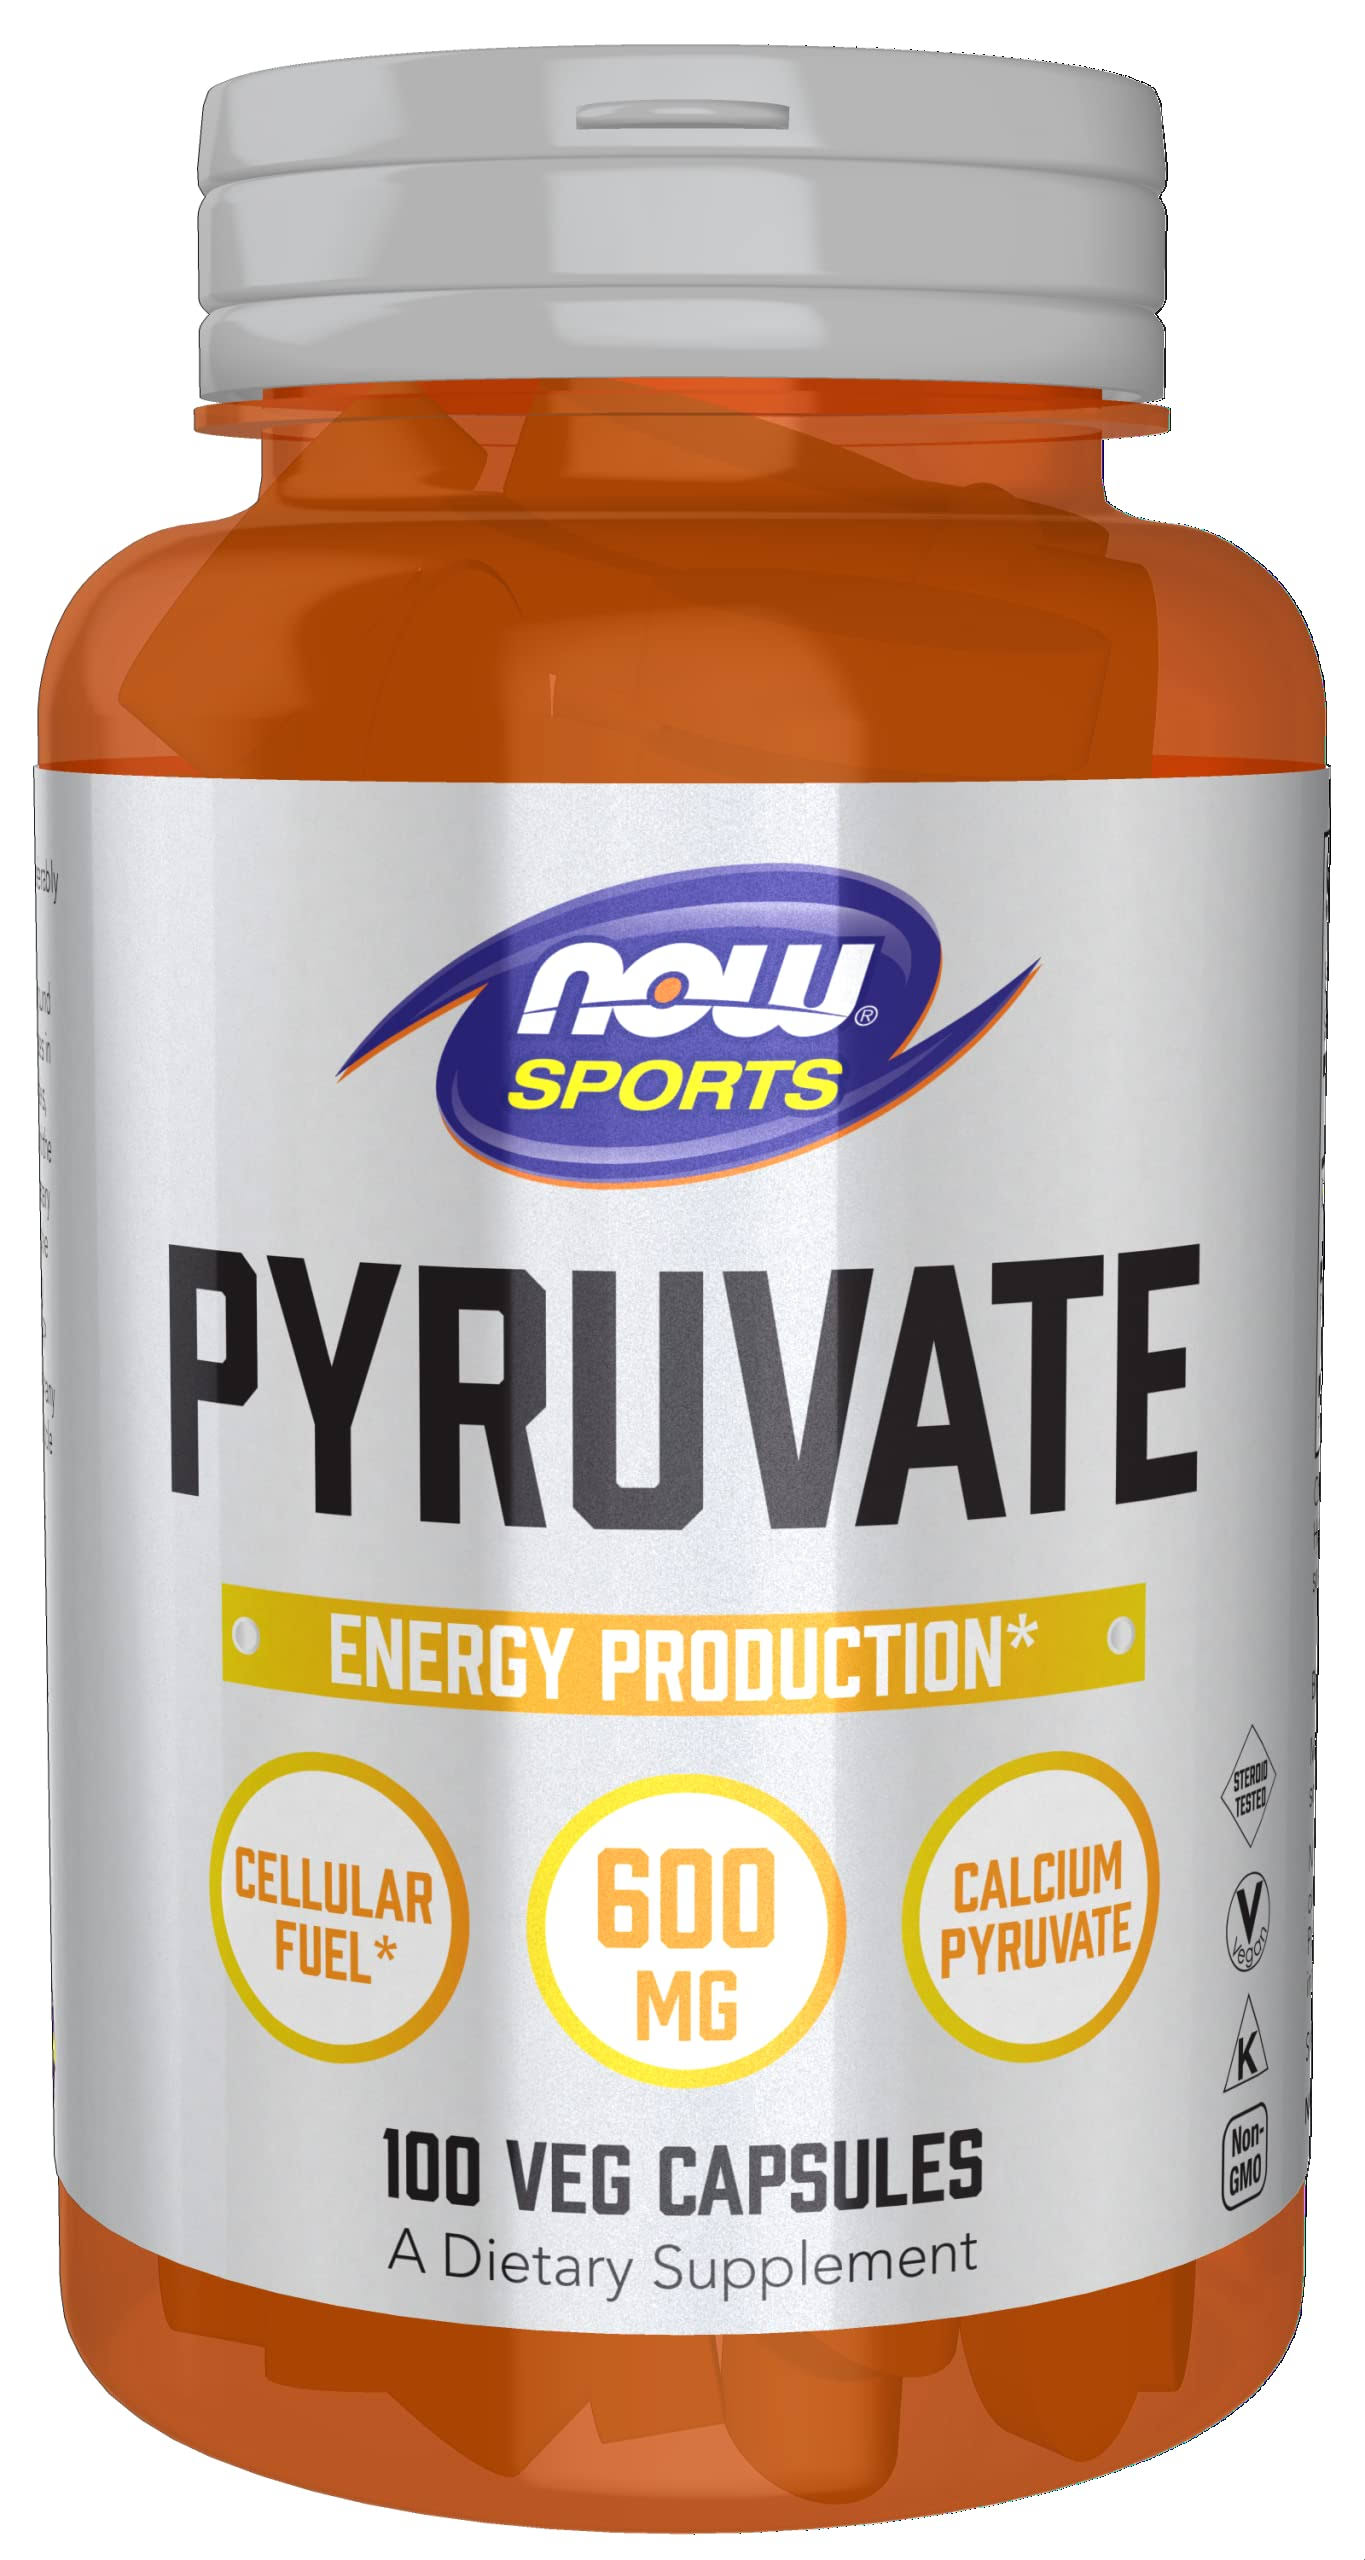 Now Sports Pyruvate Supplement - 600mg, 100 Capsules